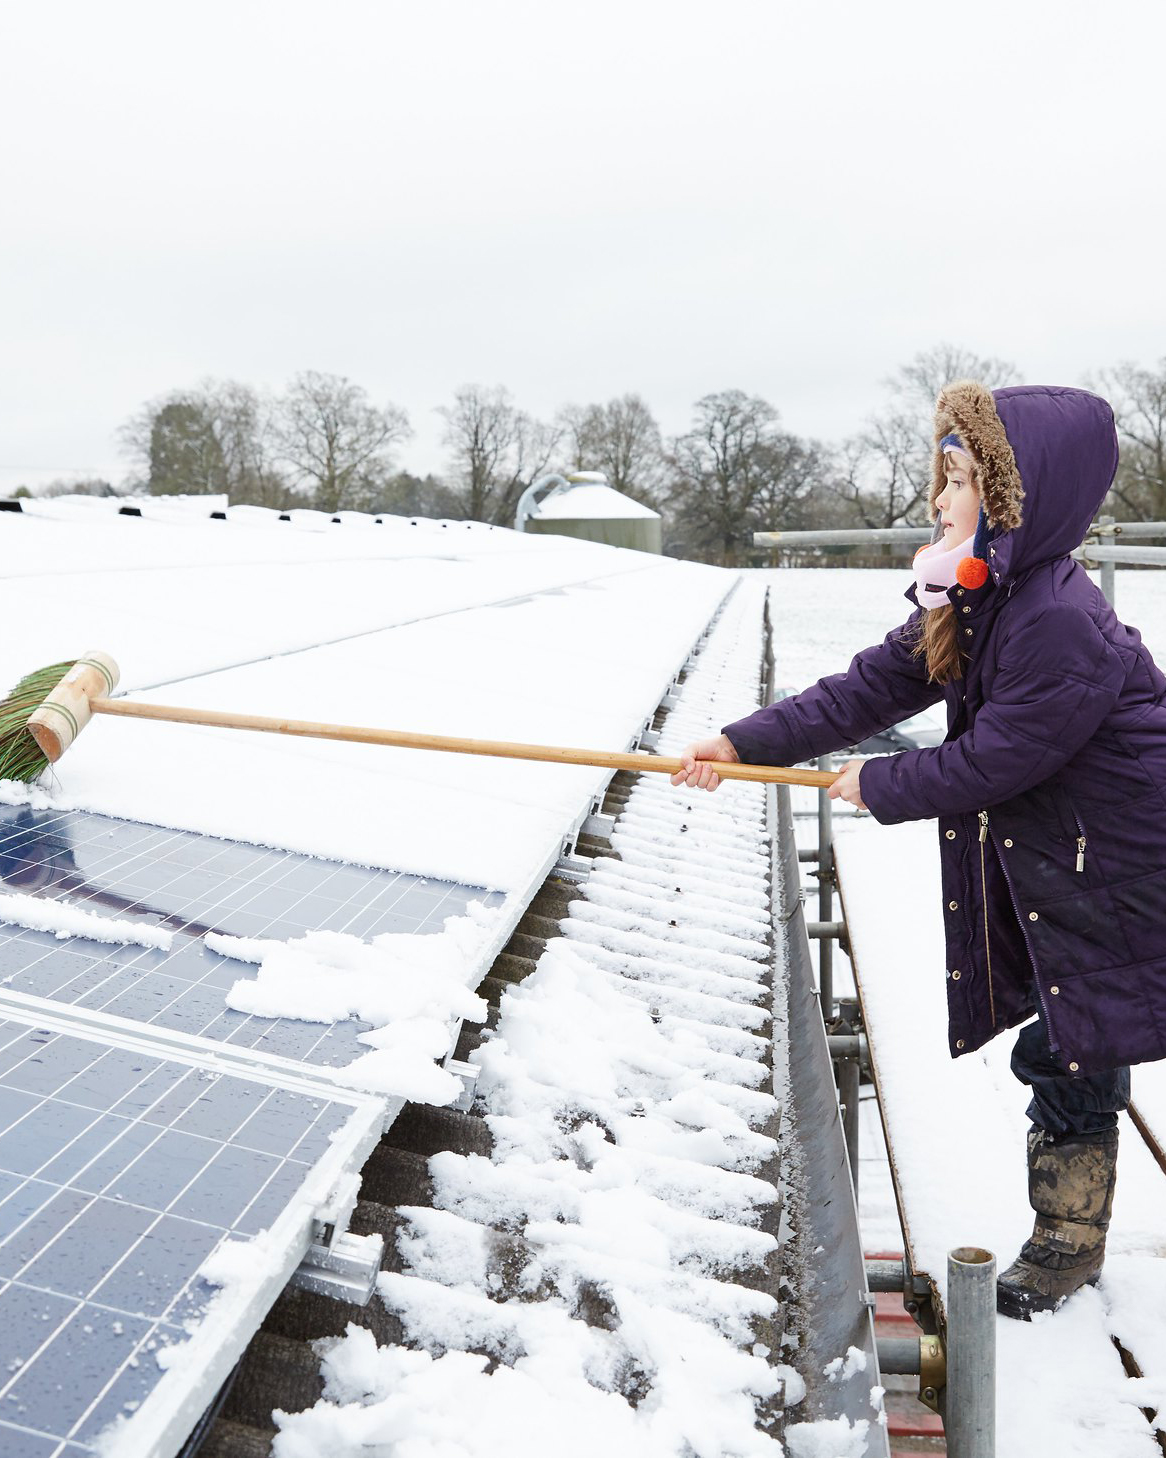 Girl clearing snow off solar panels